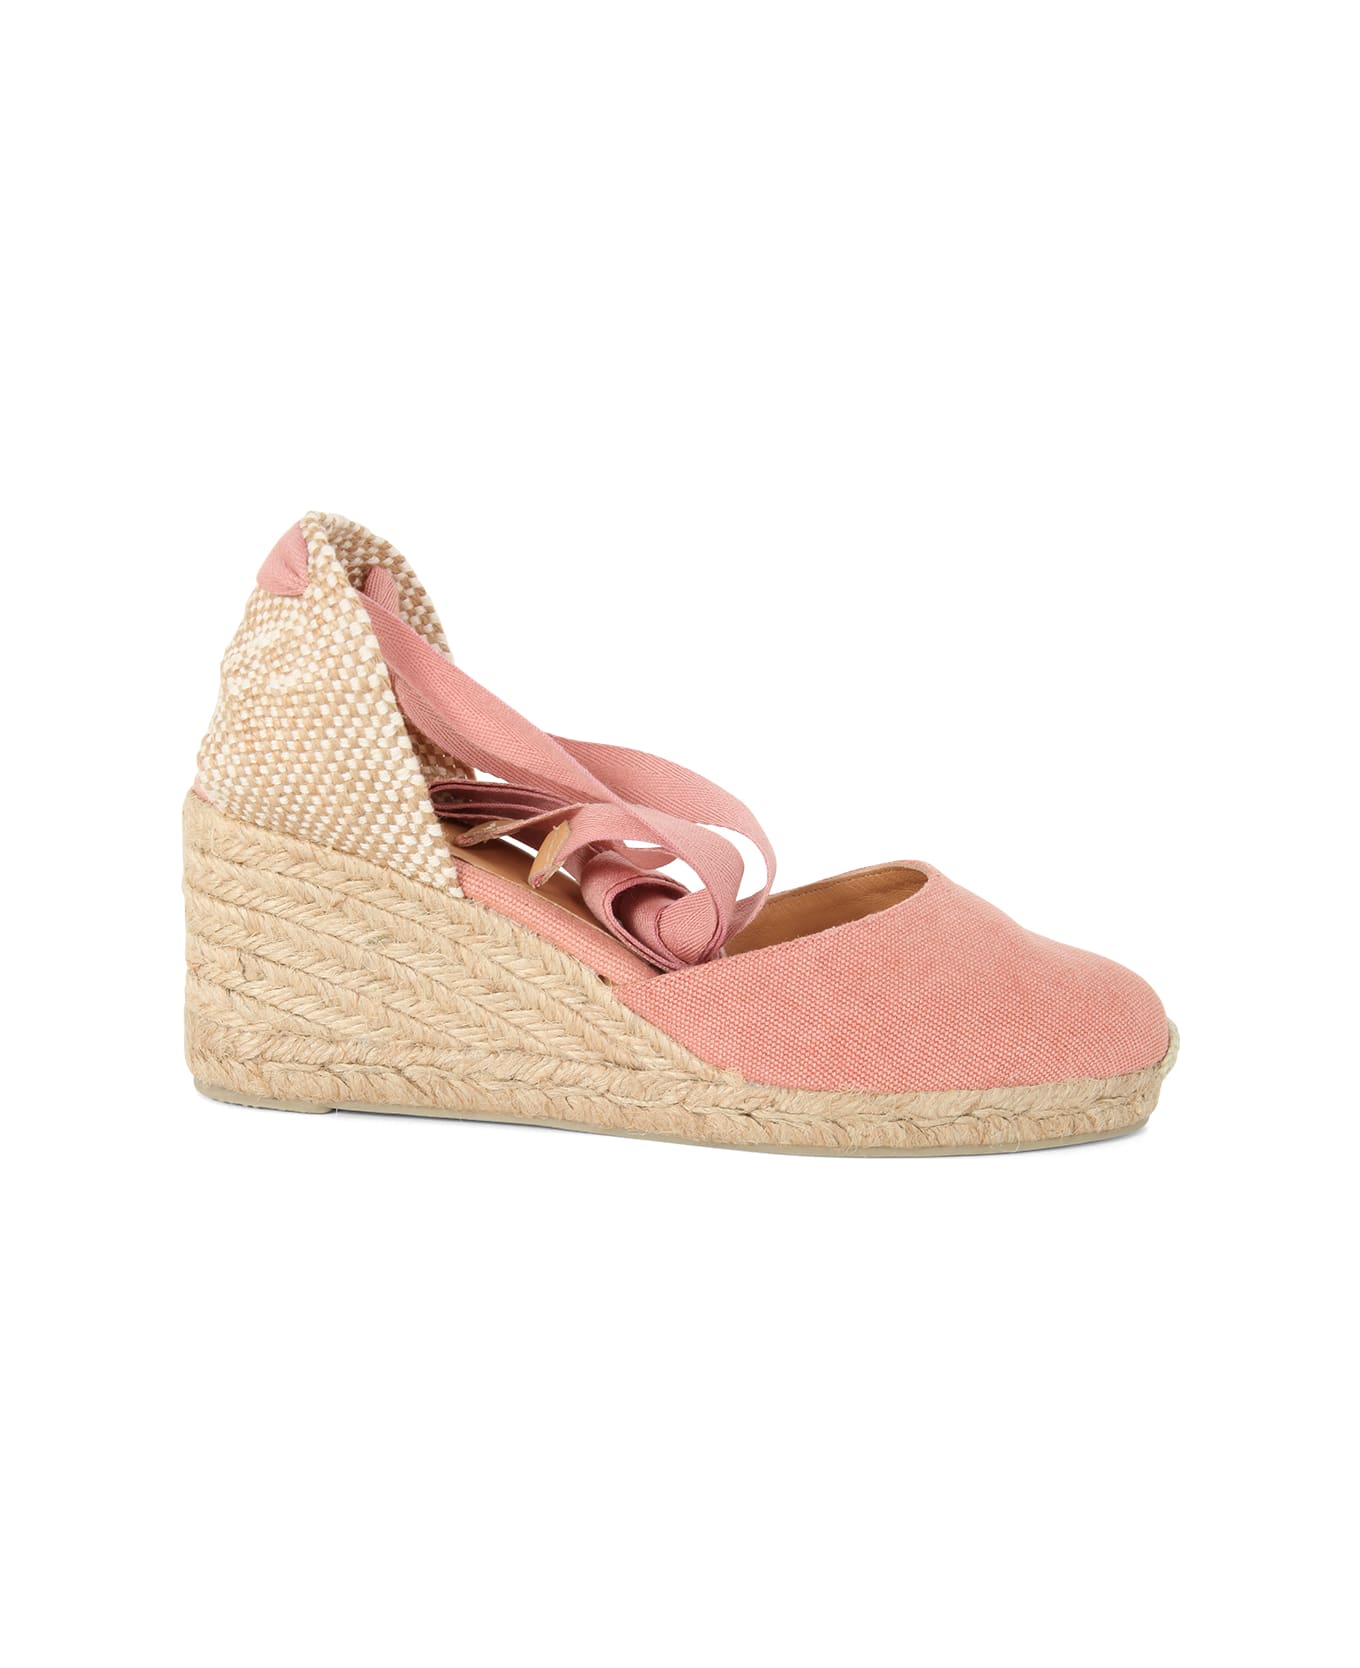 Castañer Carina Espadrilles Wedge Sandal With Ankle Laces - Pink